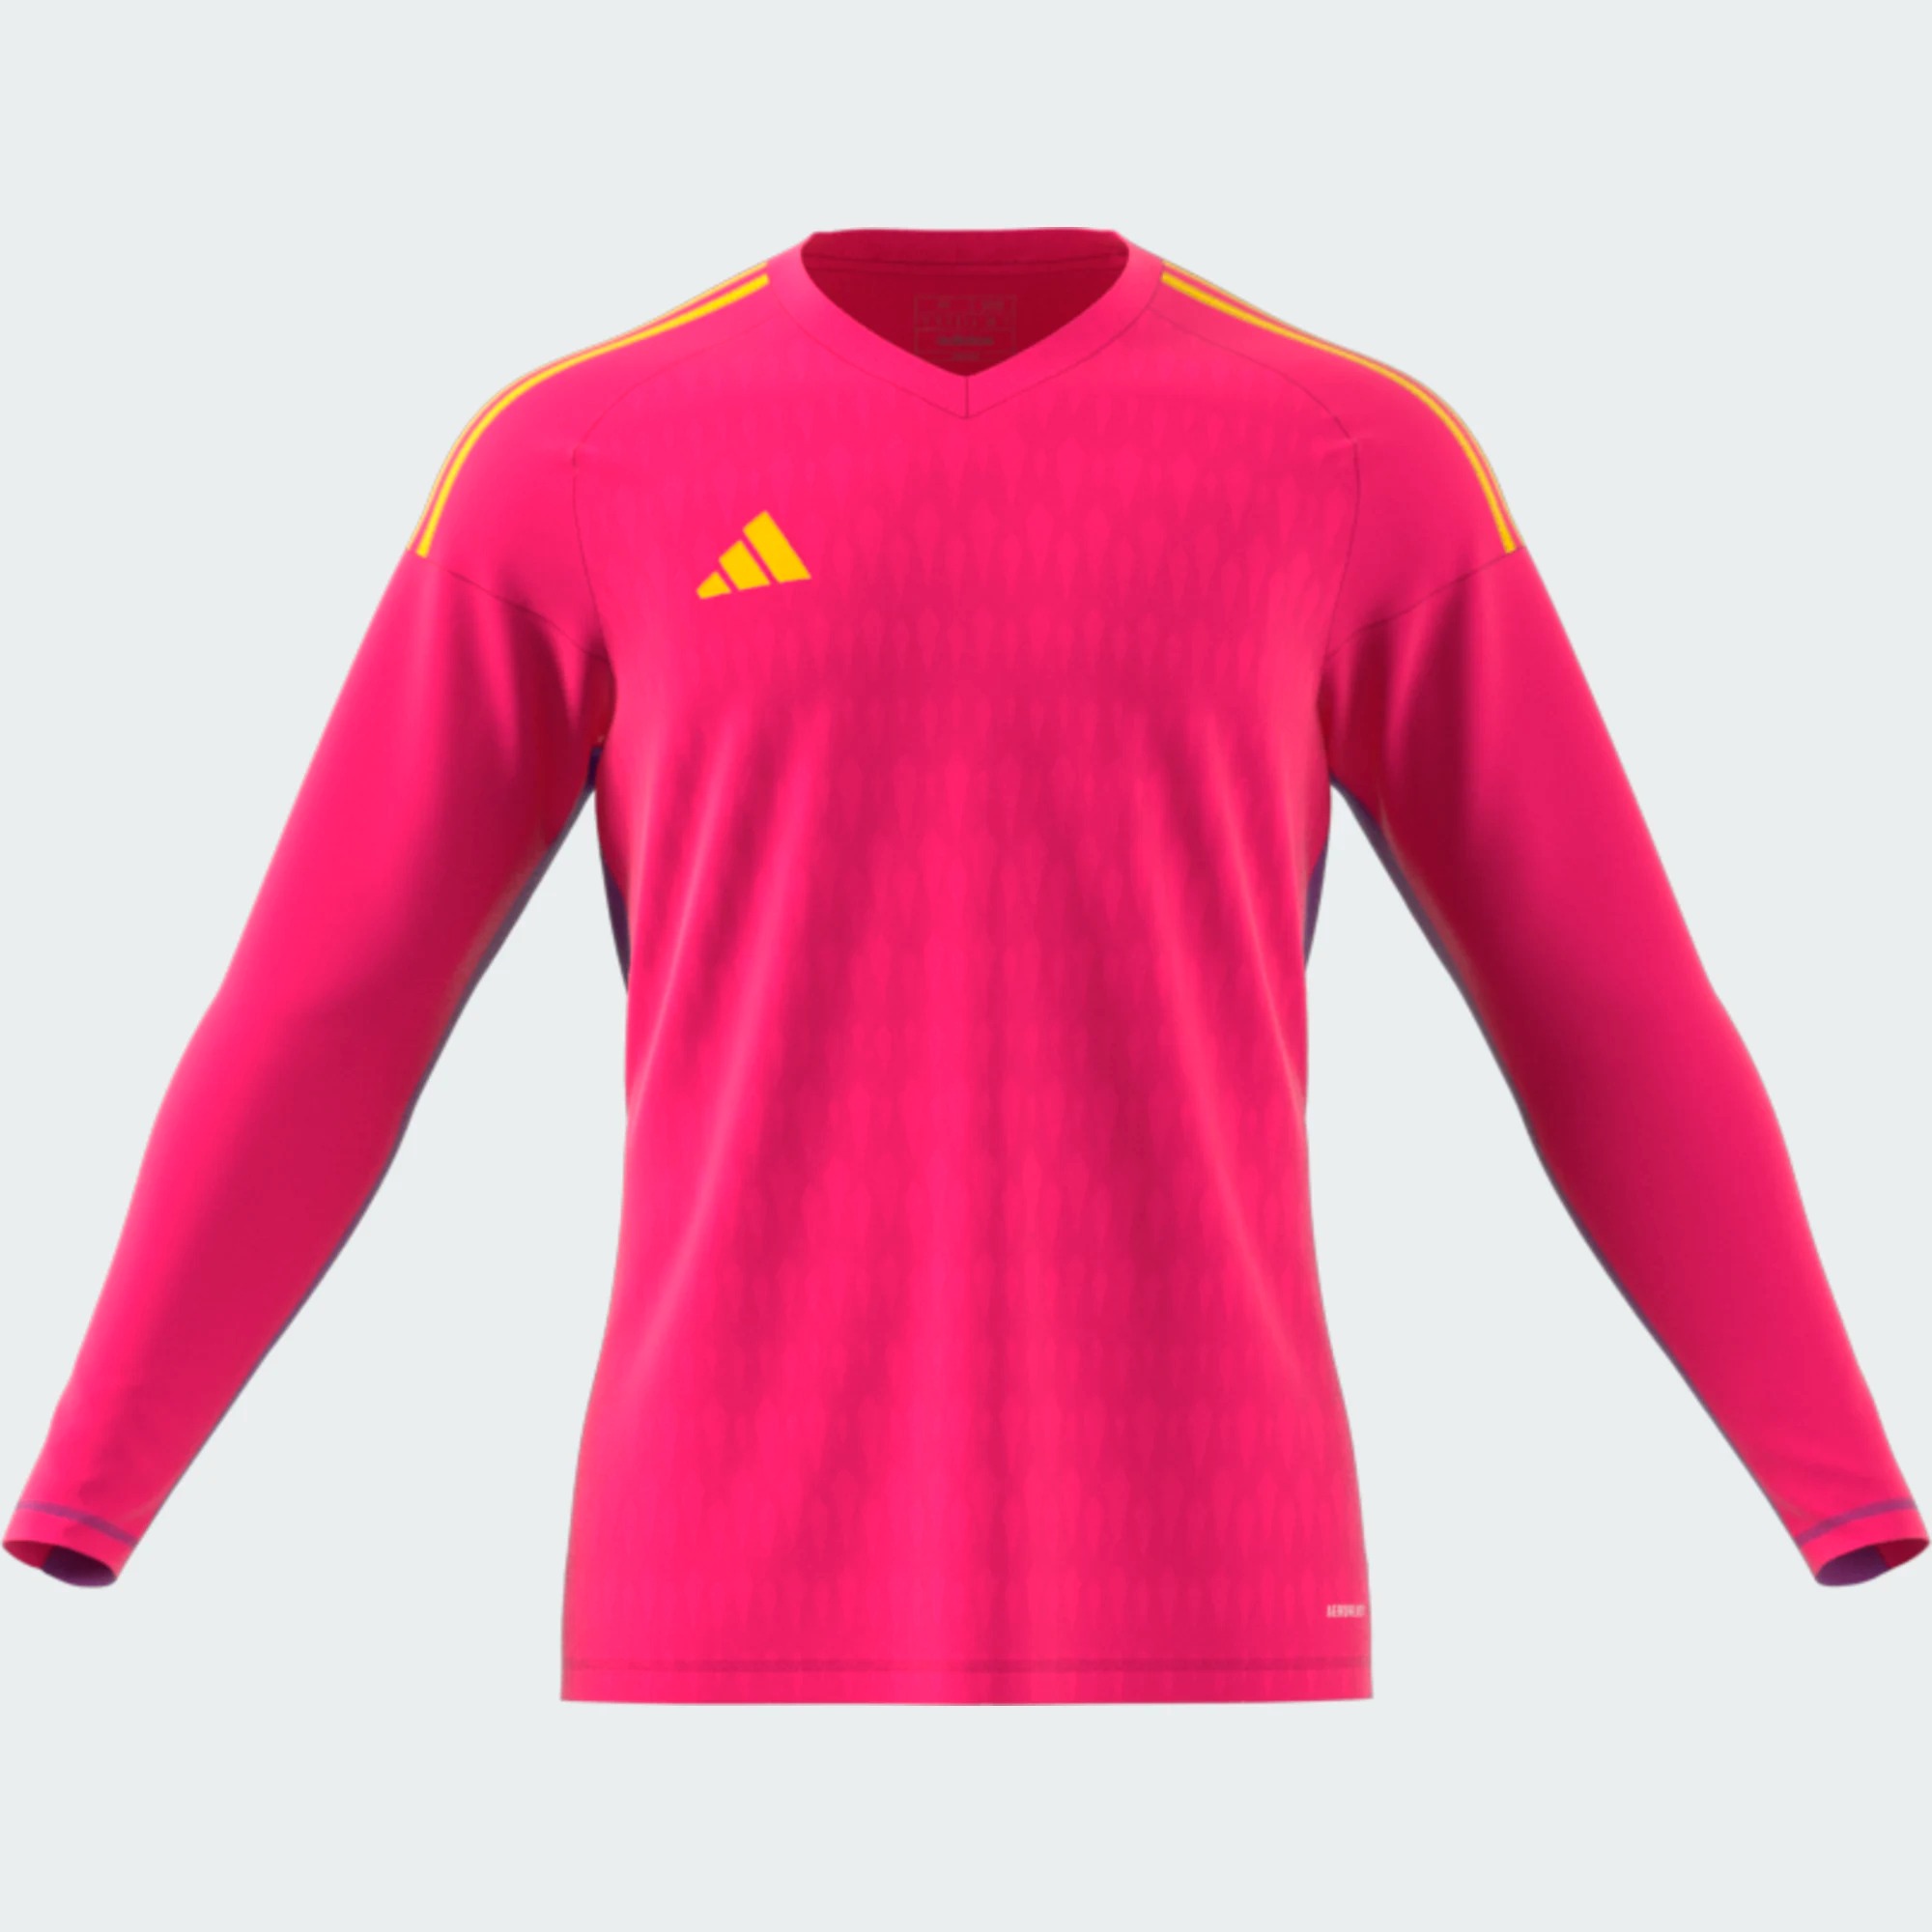 ADIDAS T23 COMPETITION GK JERSEY LS TEREMA